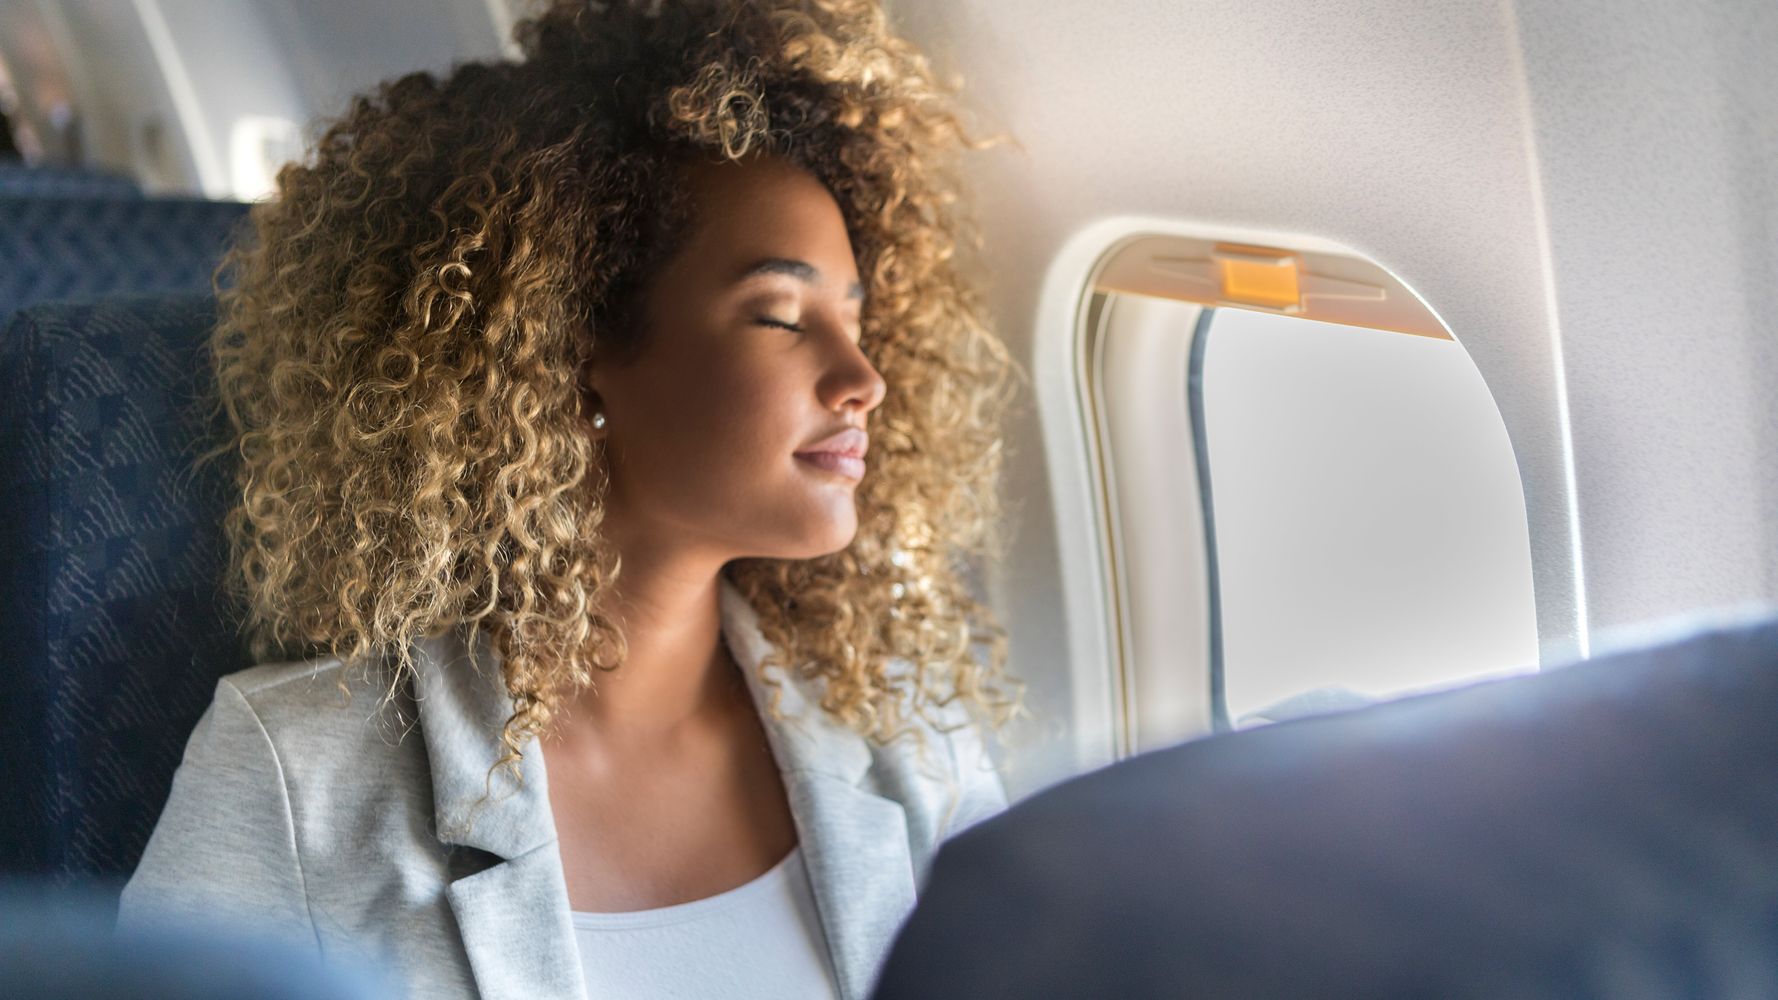 Dermatologists Share Their Airplane Carry-On Skin Care Essentials